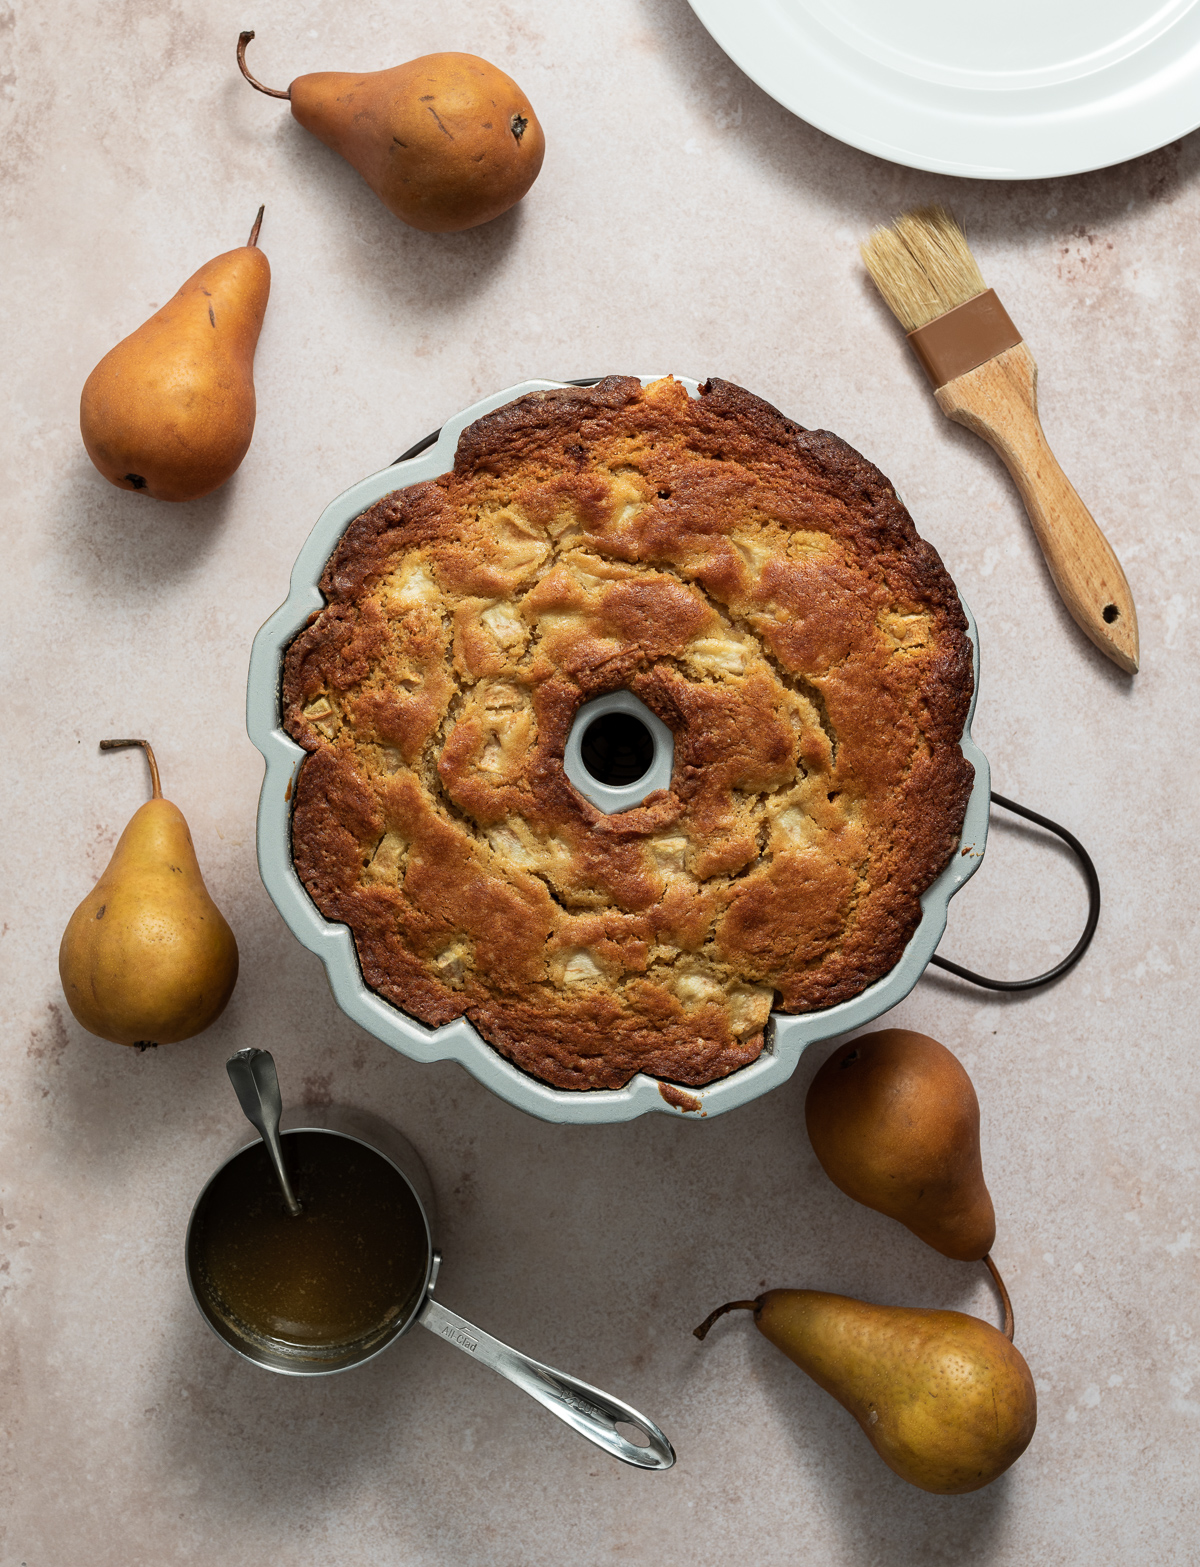 baked bundt cake in pan whole pears pastry brush